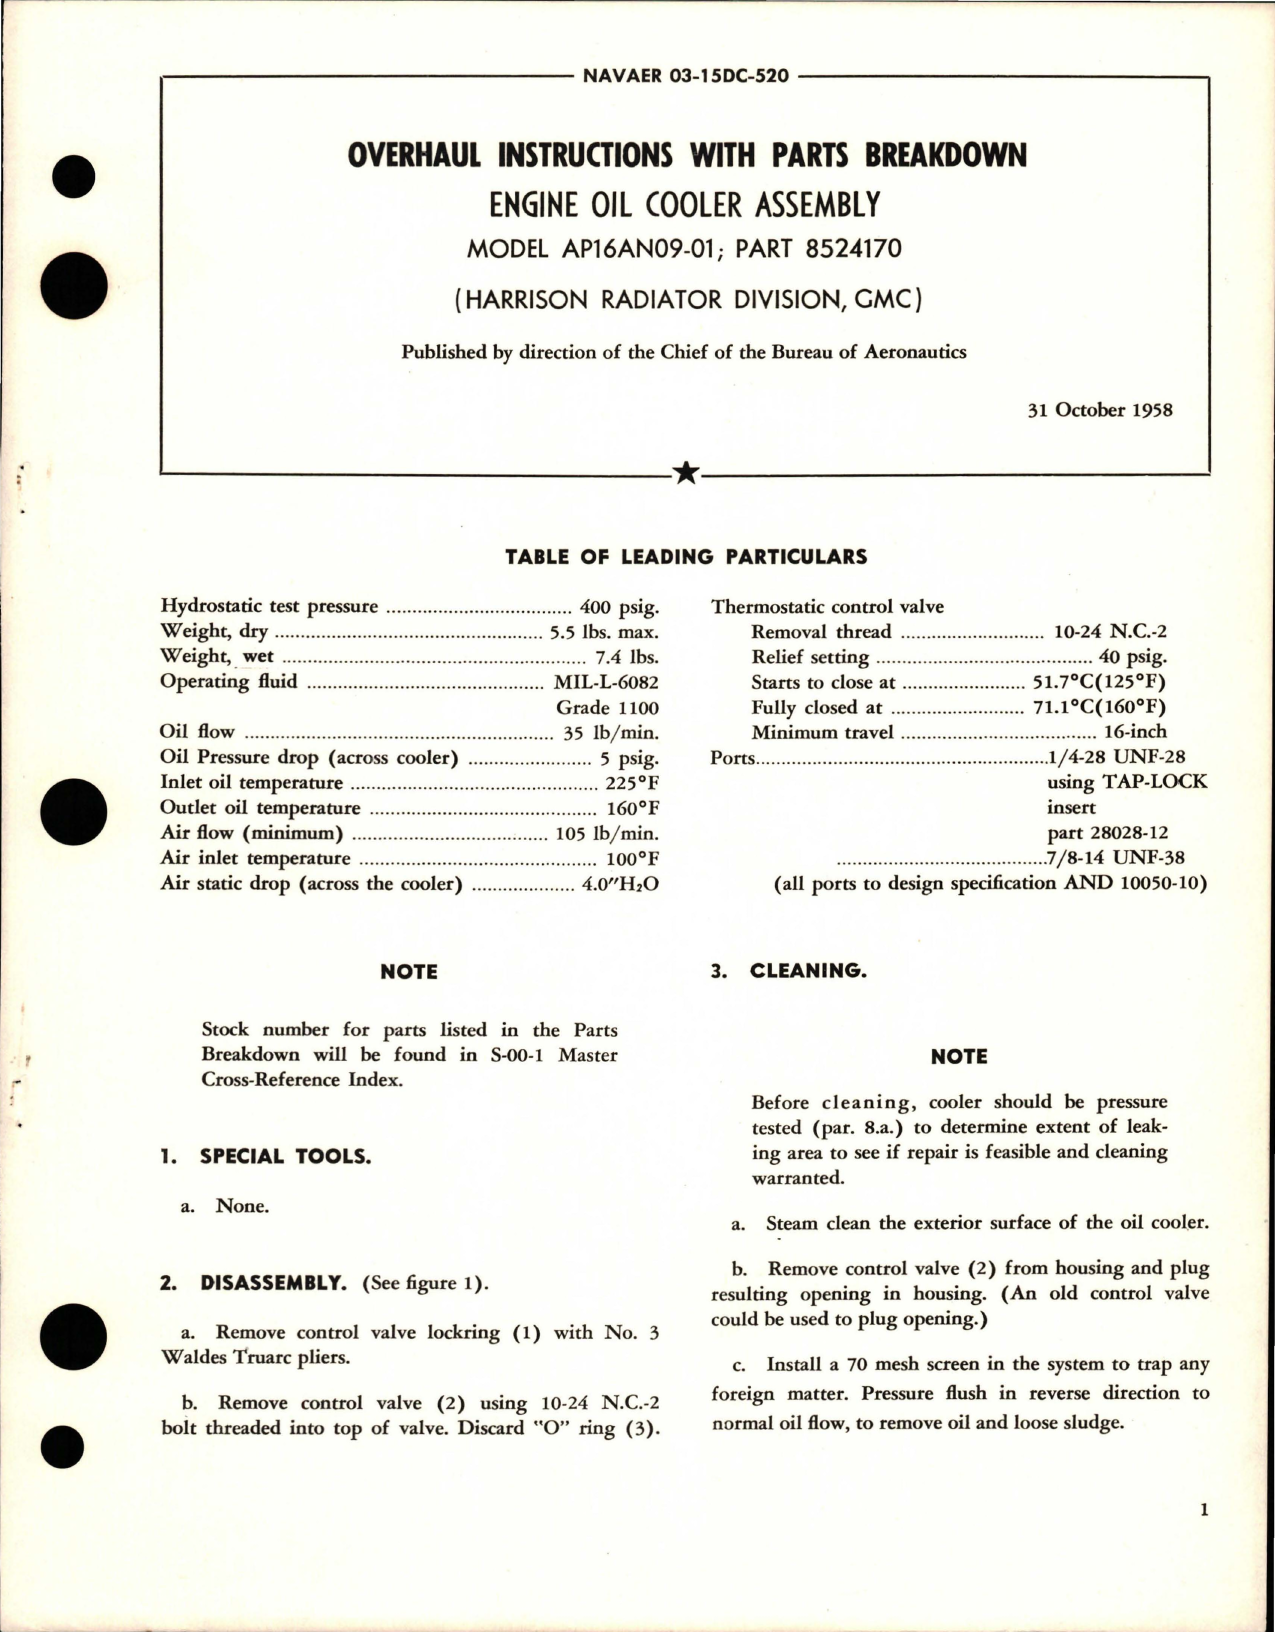 Sample page 1 from AirCorps Library document: Overhaul Instructions with Parts Breakdown for Hydraulic Fluid Cooler - Model AP16AU11-01 - Part 8520451